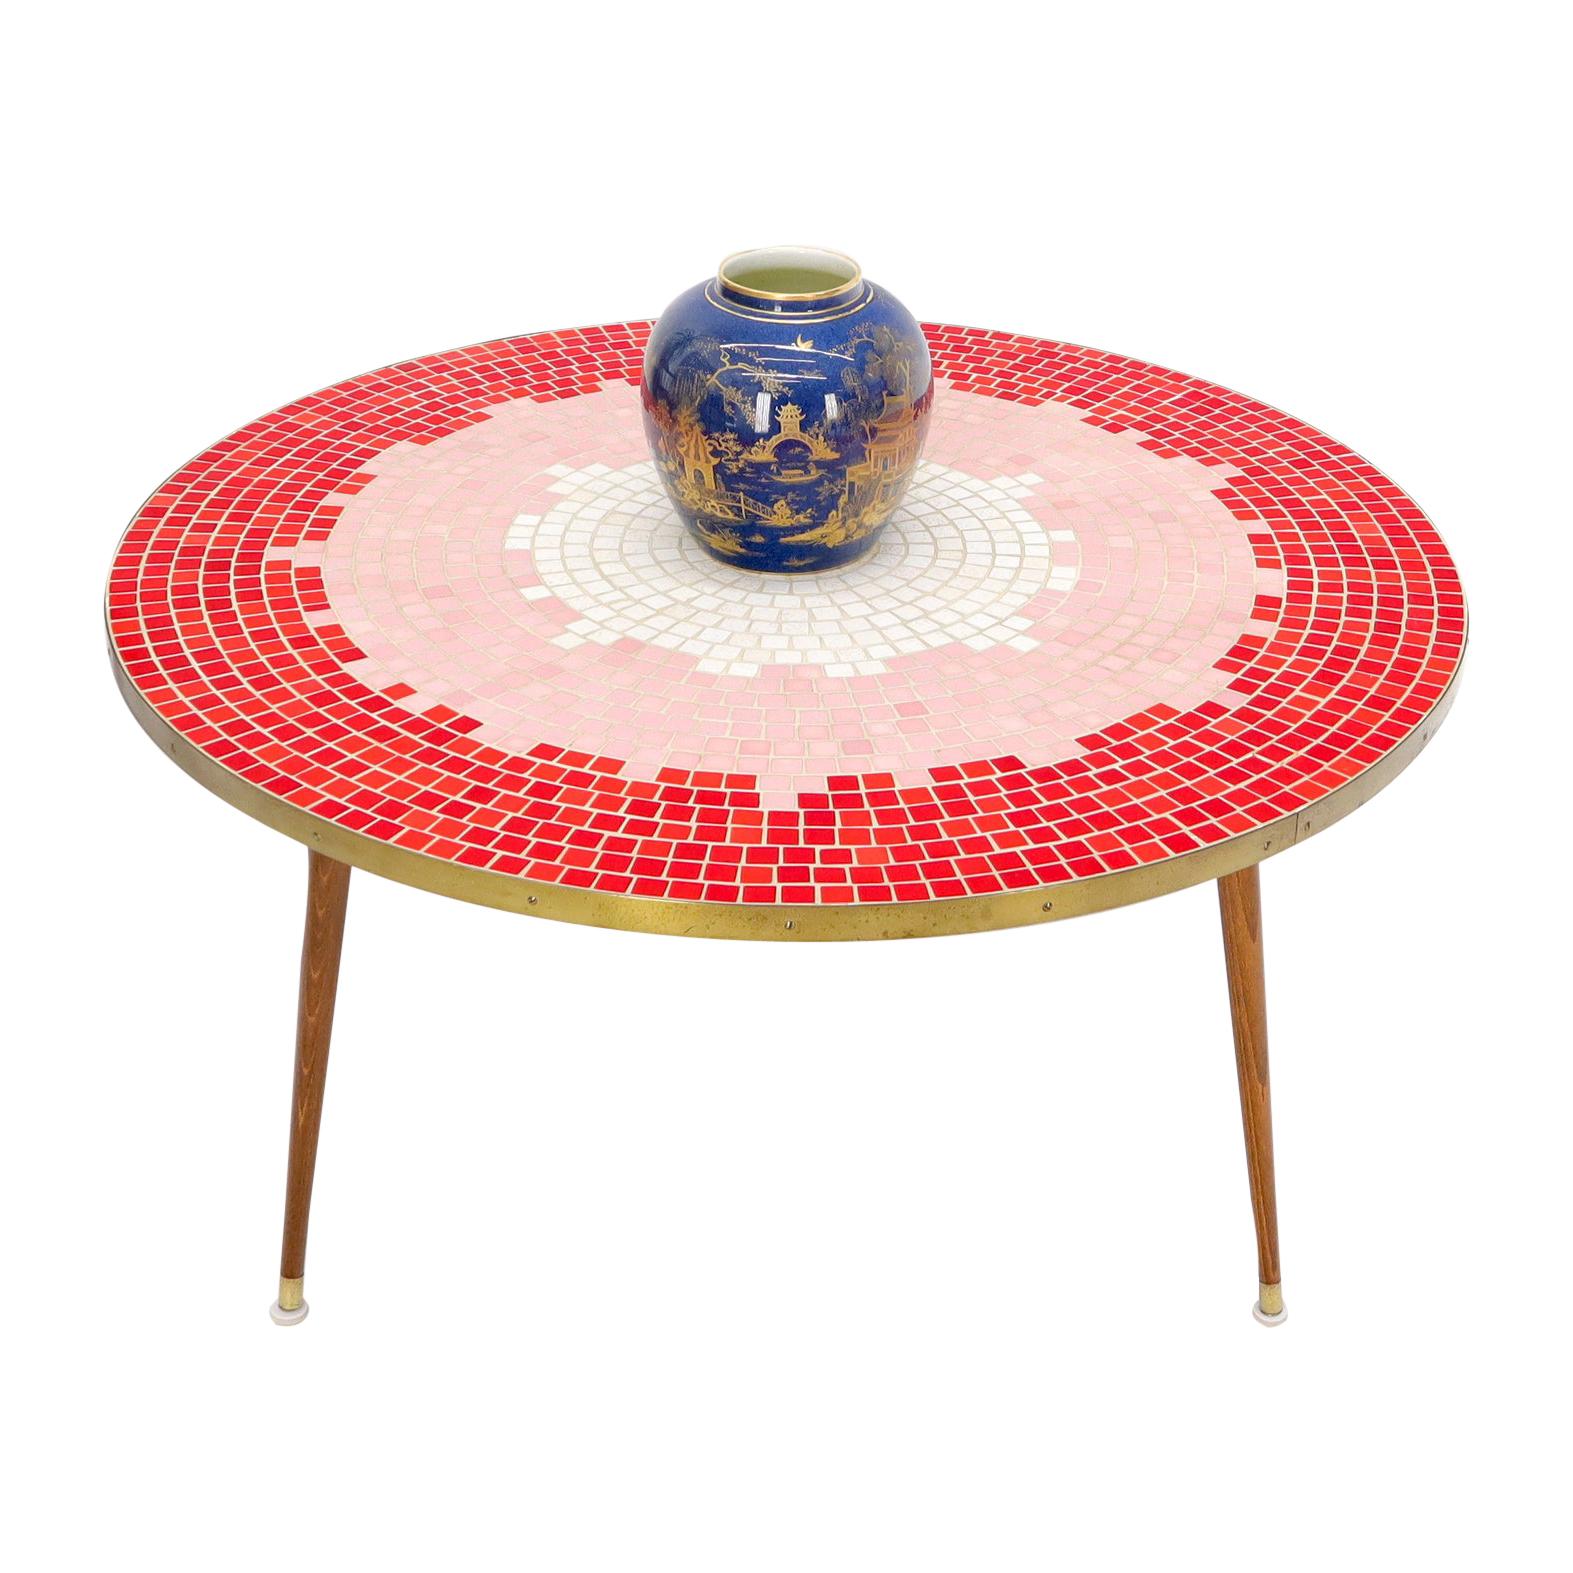 Sunburst Red Tile Mosaic Round Mid-Century Modern Coffee Table For Sale